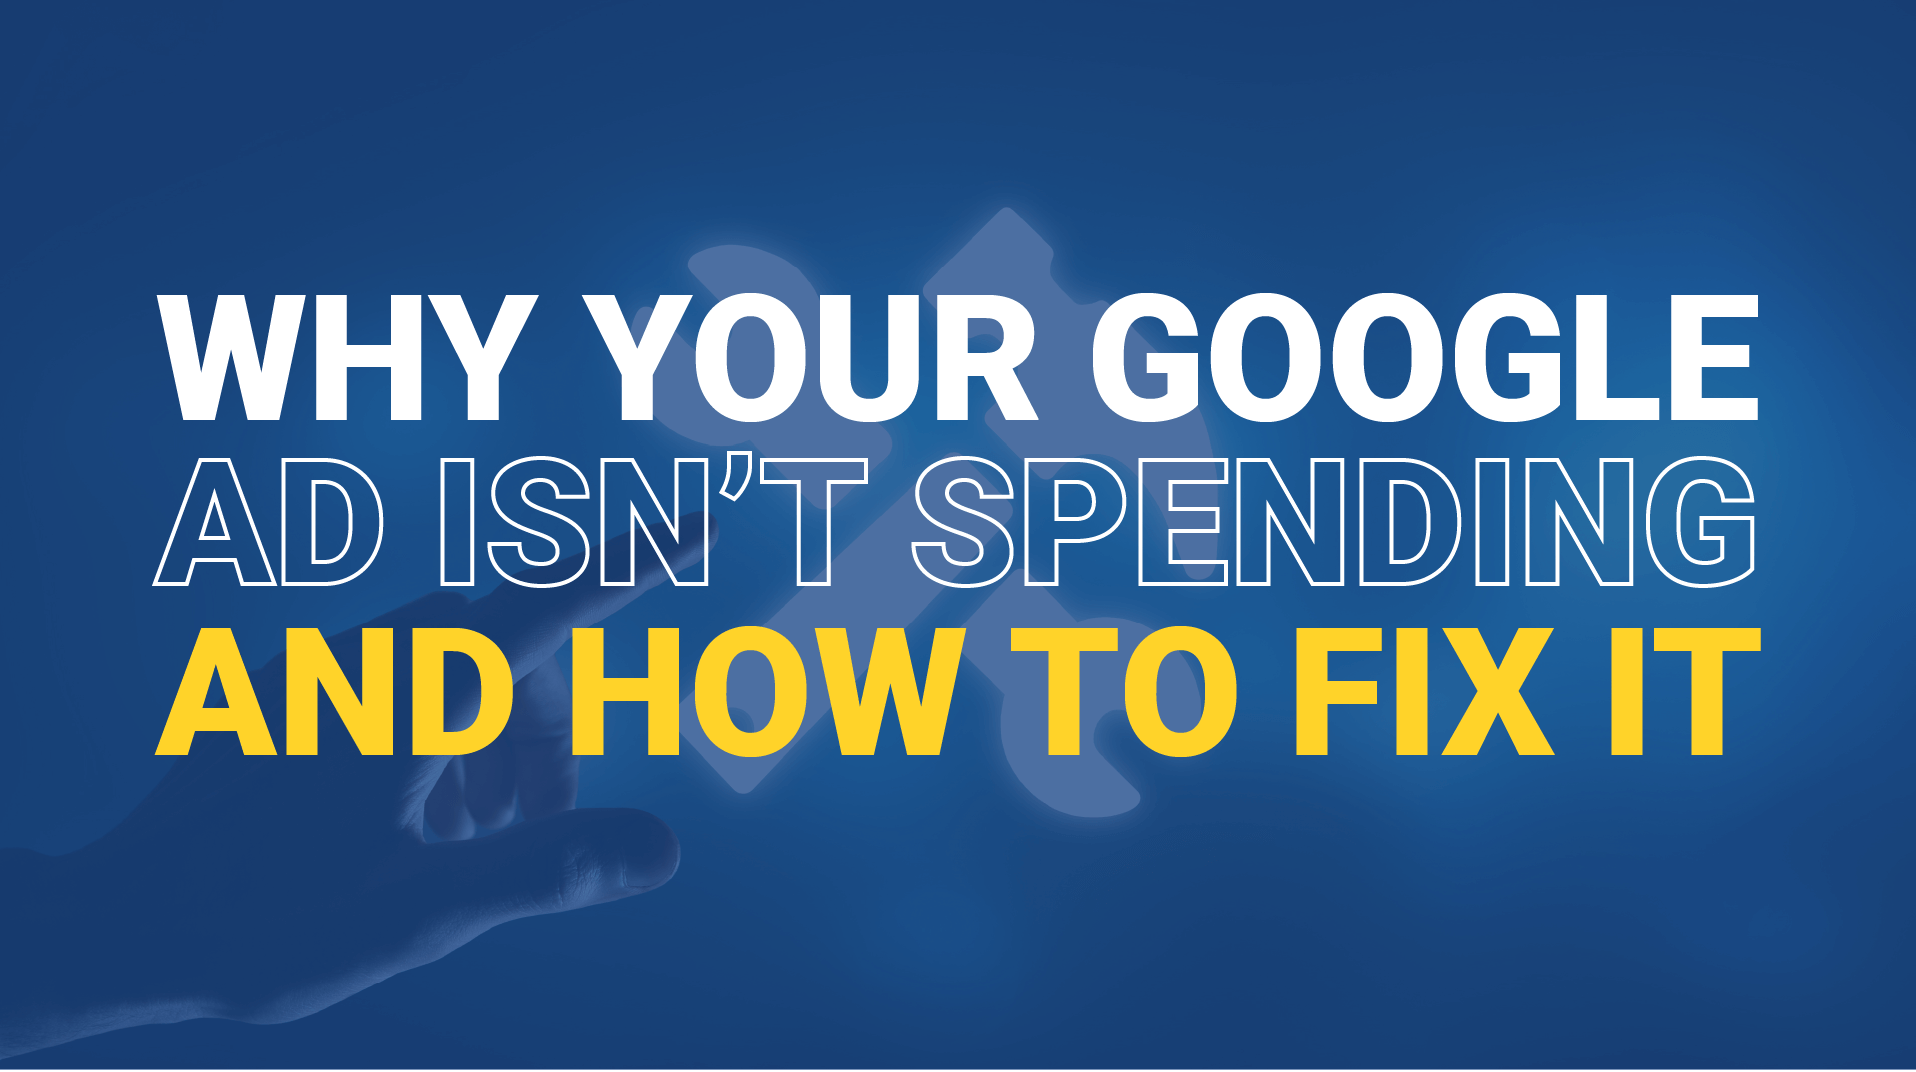 Why Your Google Ads Not Spending Budget?